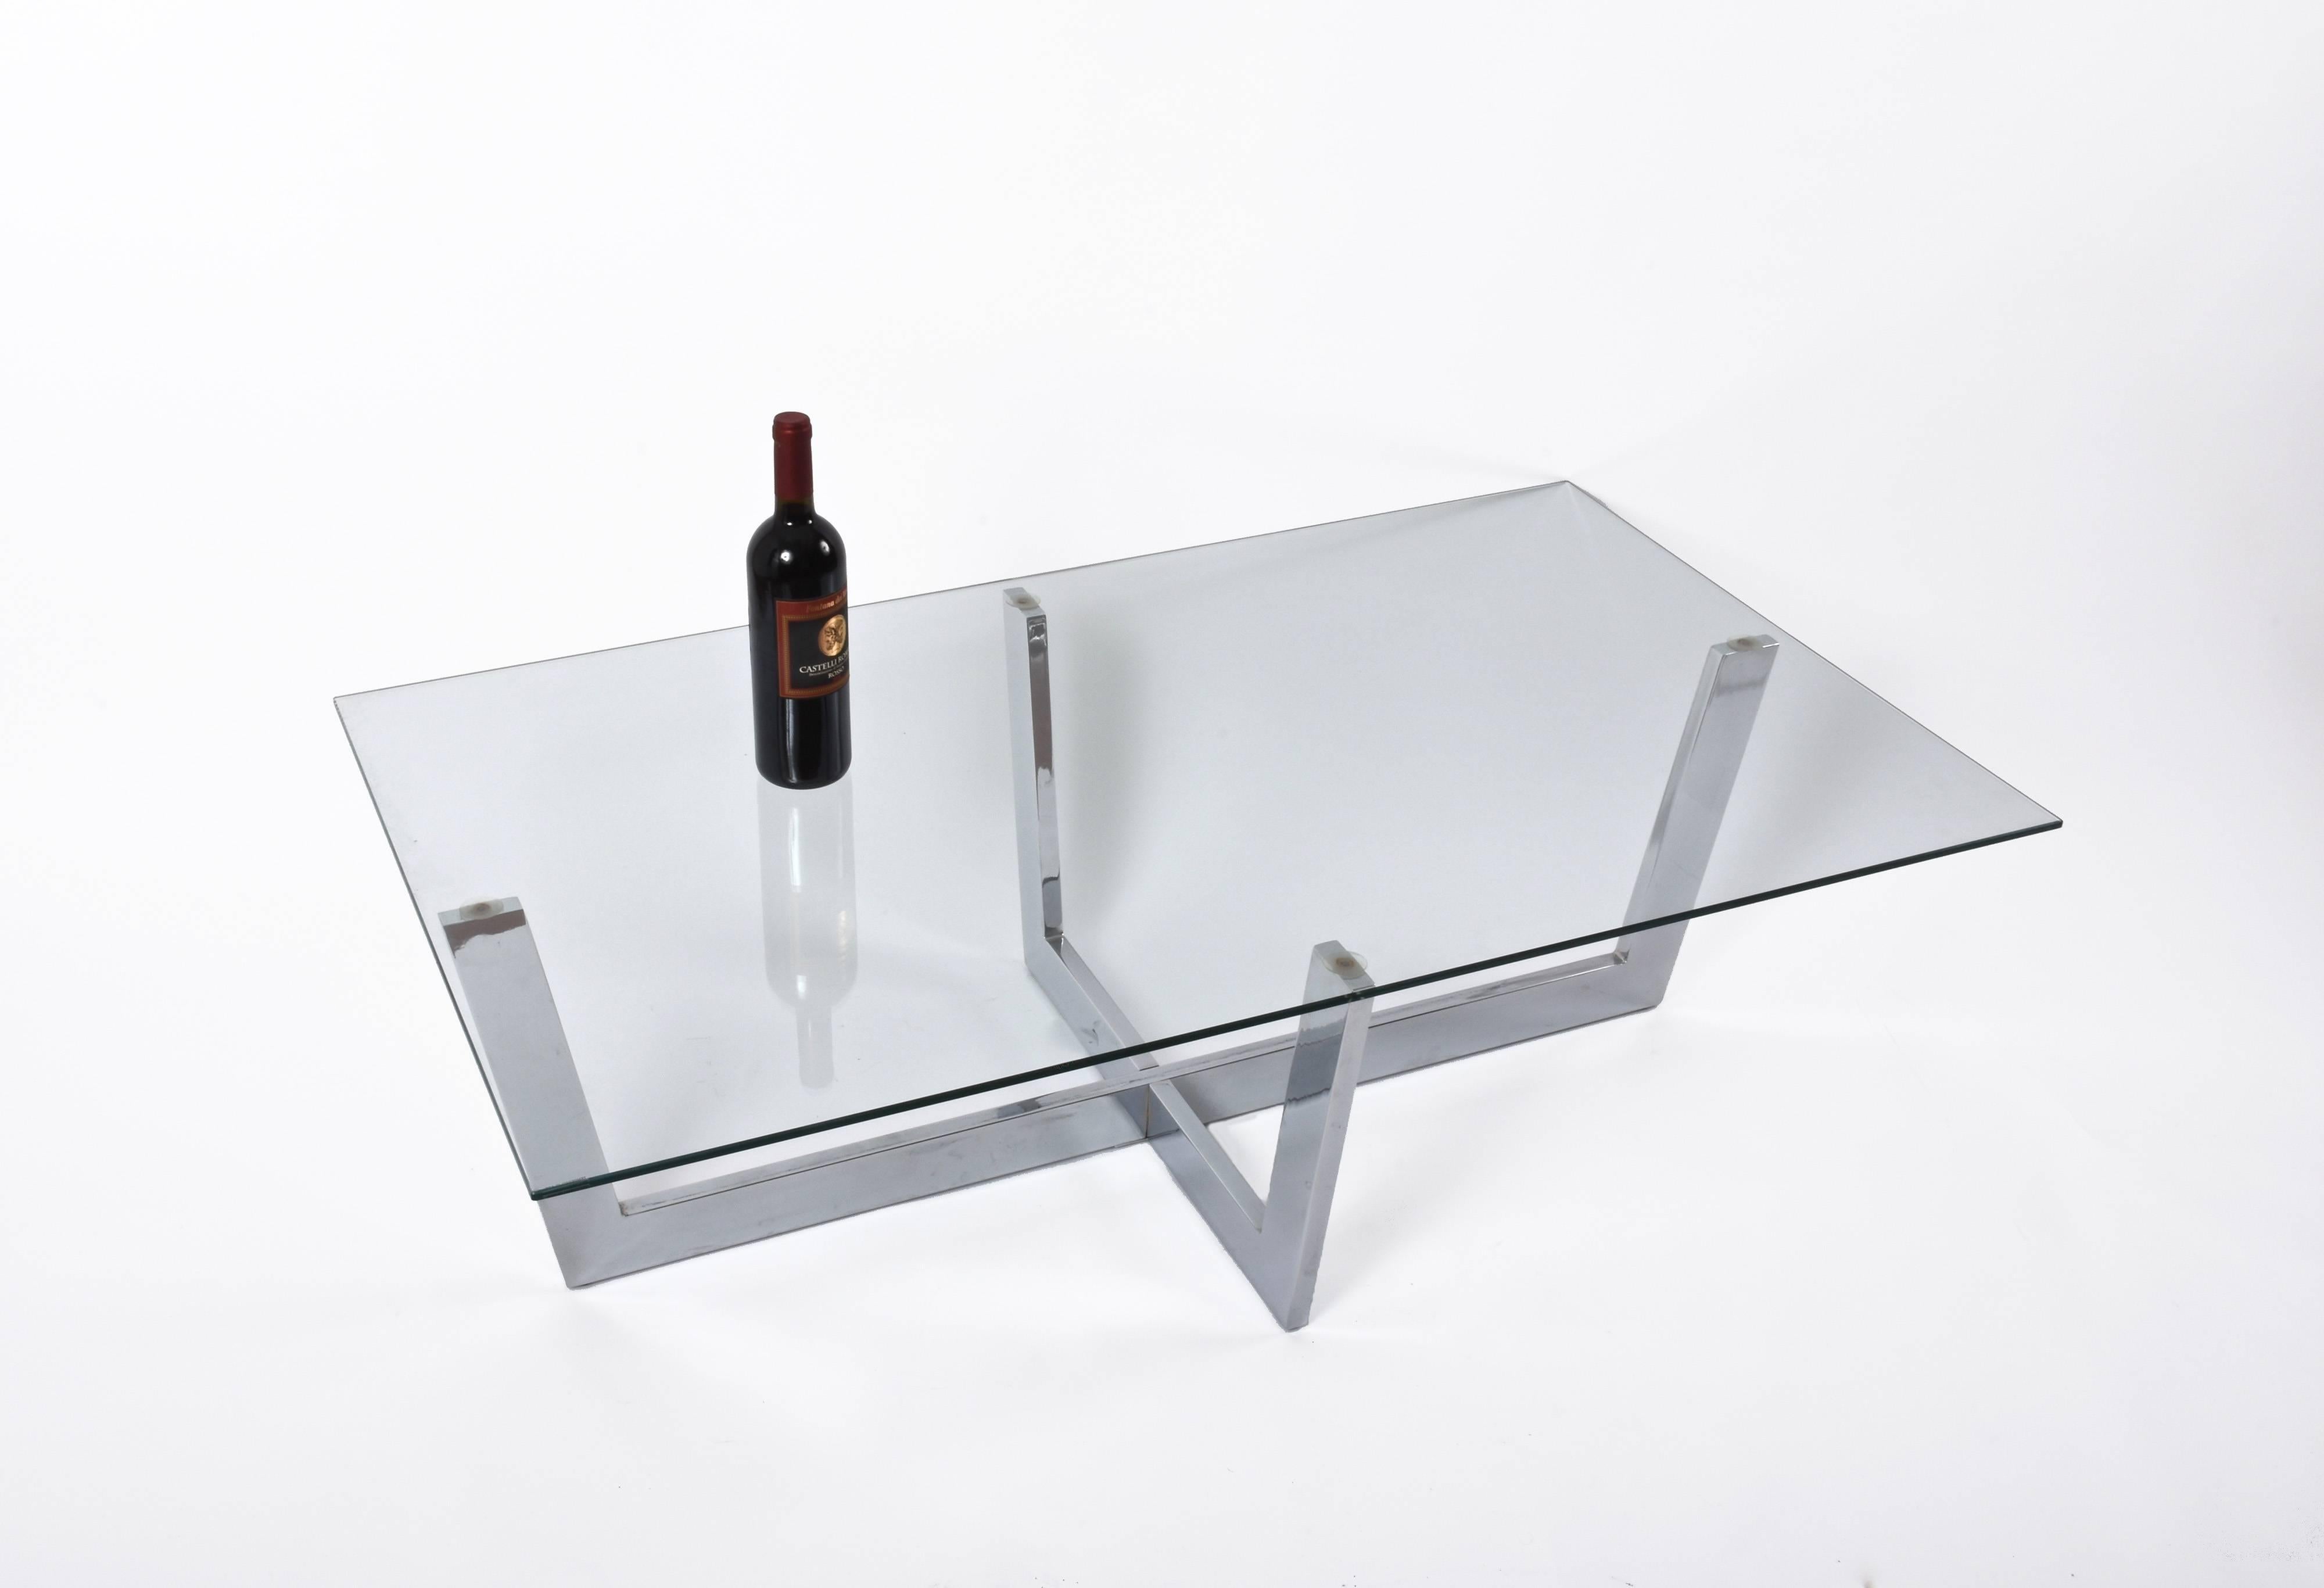 Wonderful rectangular coffee table in chromed steel with glass top produced in Italy during 1970s. 

This great midcentury piece, with a base made by two chromed steel pieces crossing in the center below the simple yet elegant crystal glass